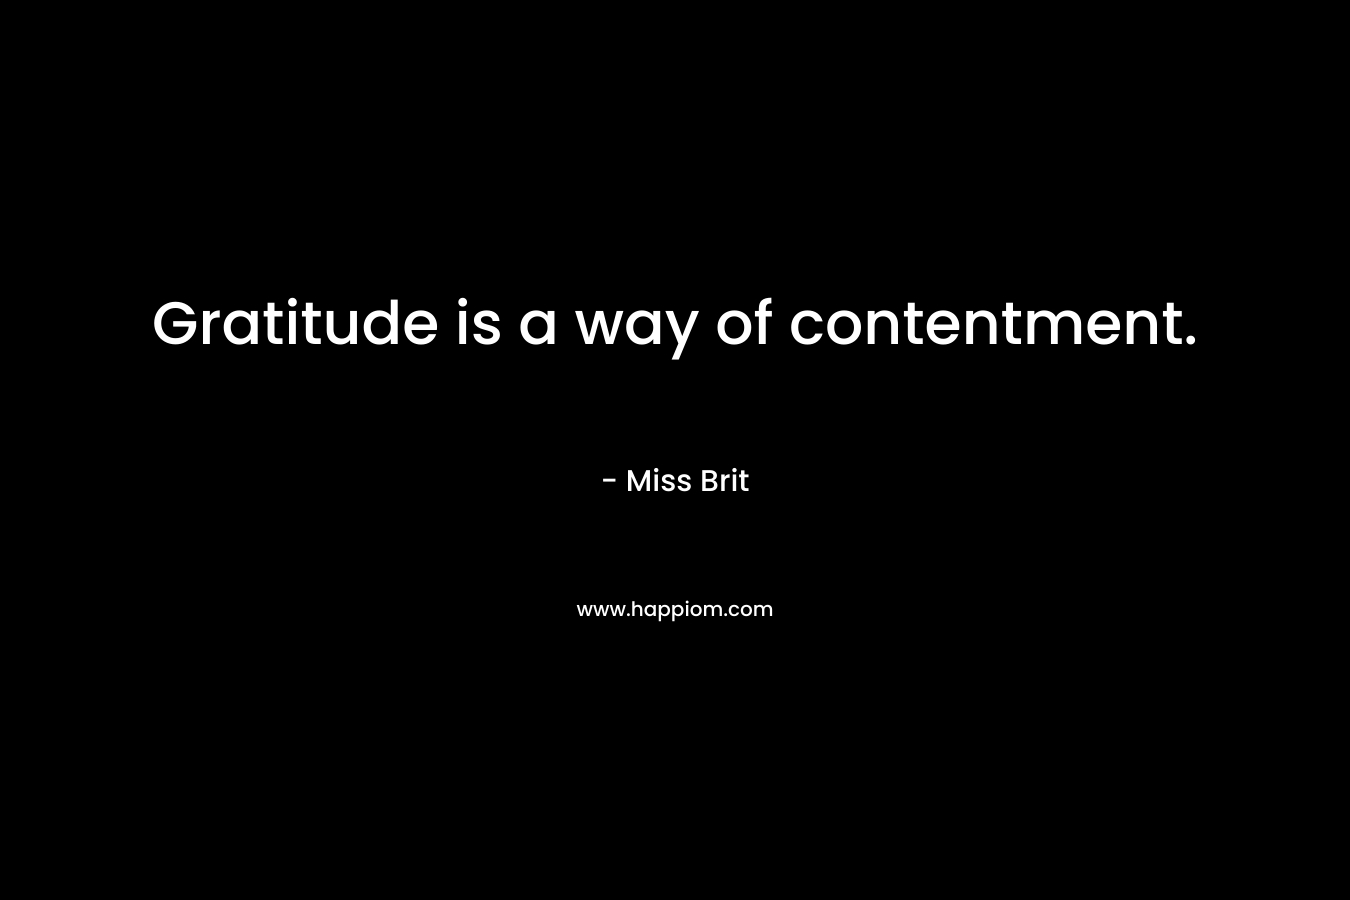 Gratitude is a way of contentment. – Miss Brit